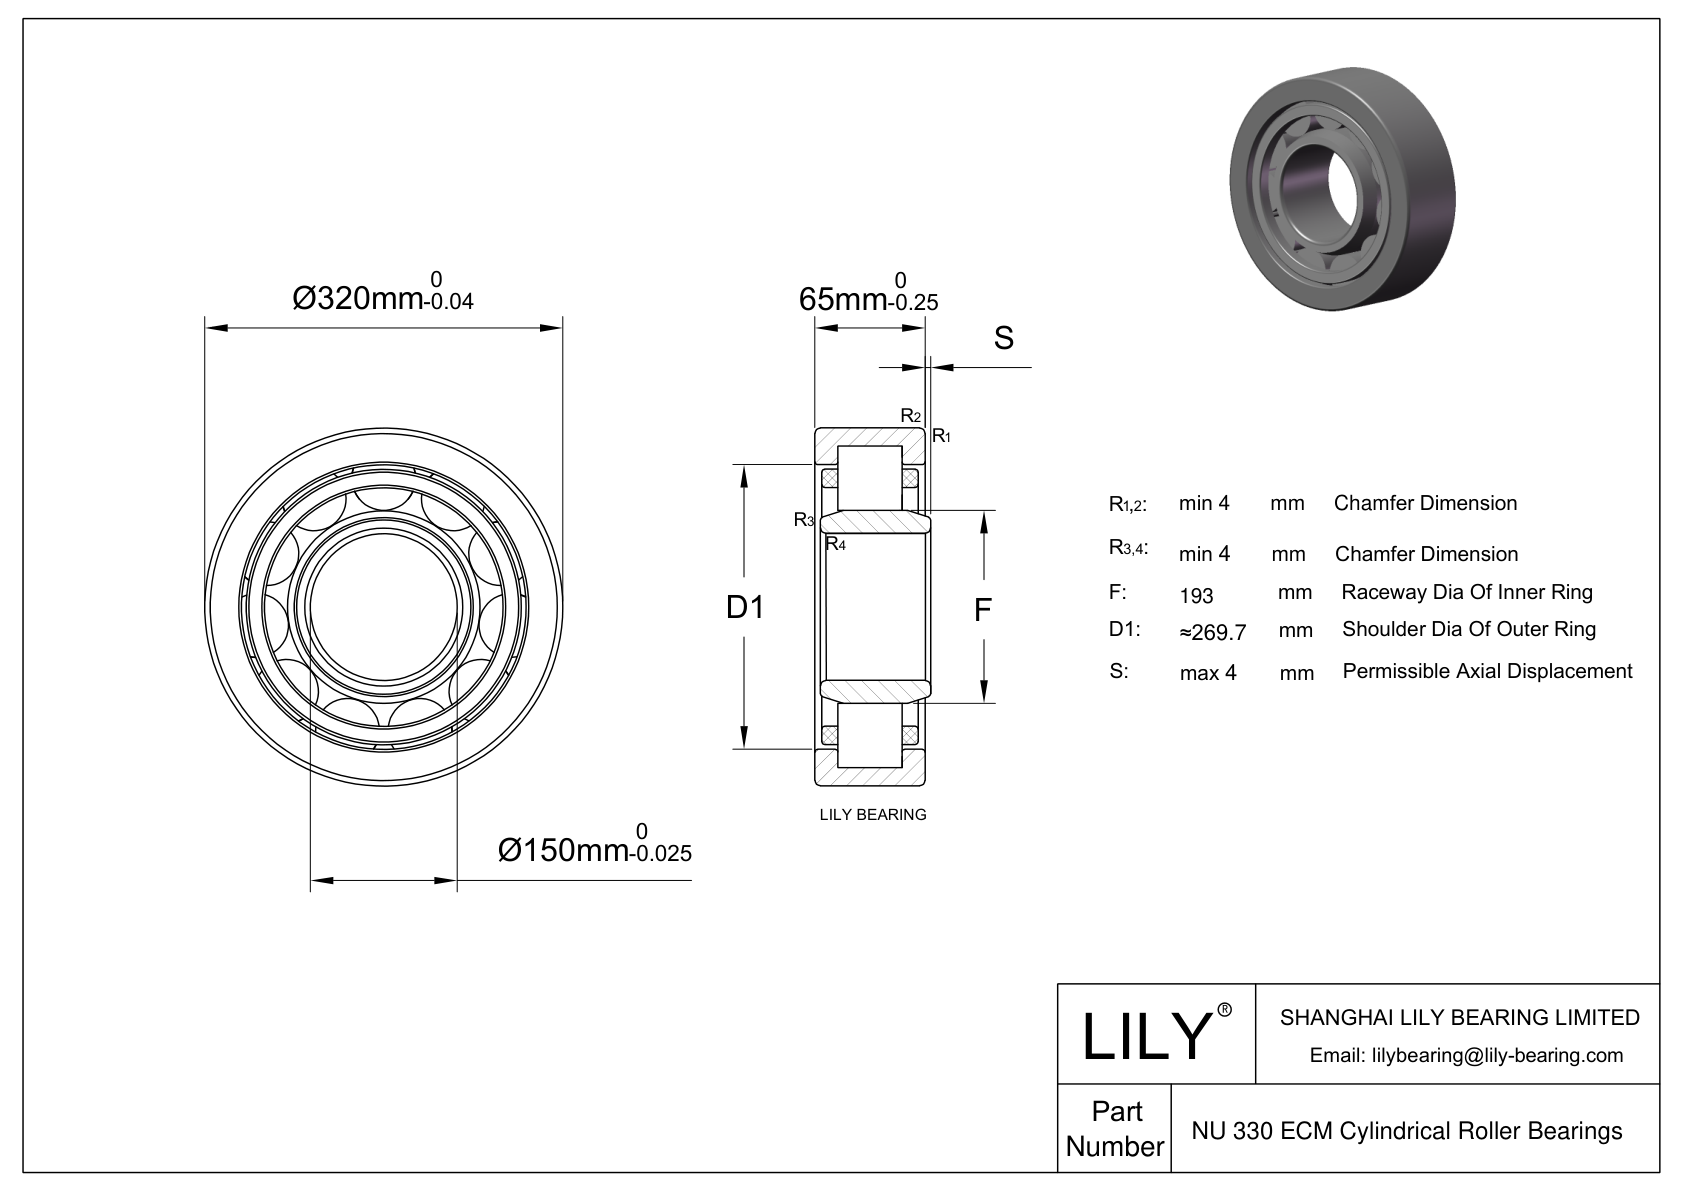 NU 330 ECM/C3VL2071 Ceramic Coated Cylindrical Roller Bearings cad drawing